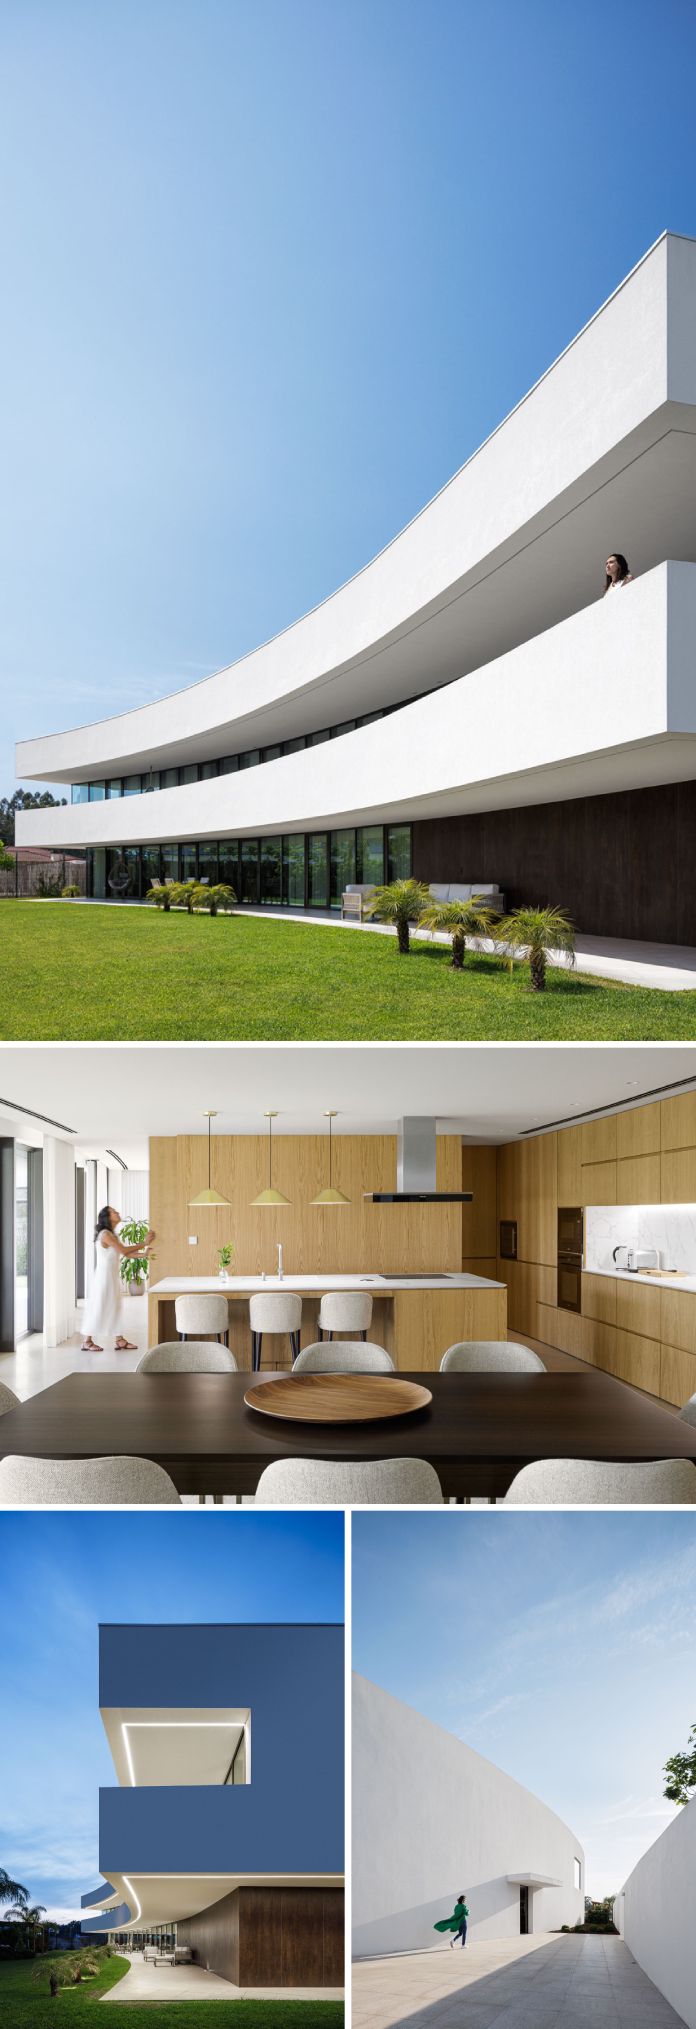 The Curved White House in Portugal by Frari studio of architect Maria Fradinho